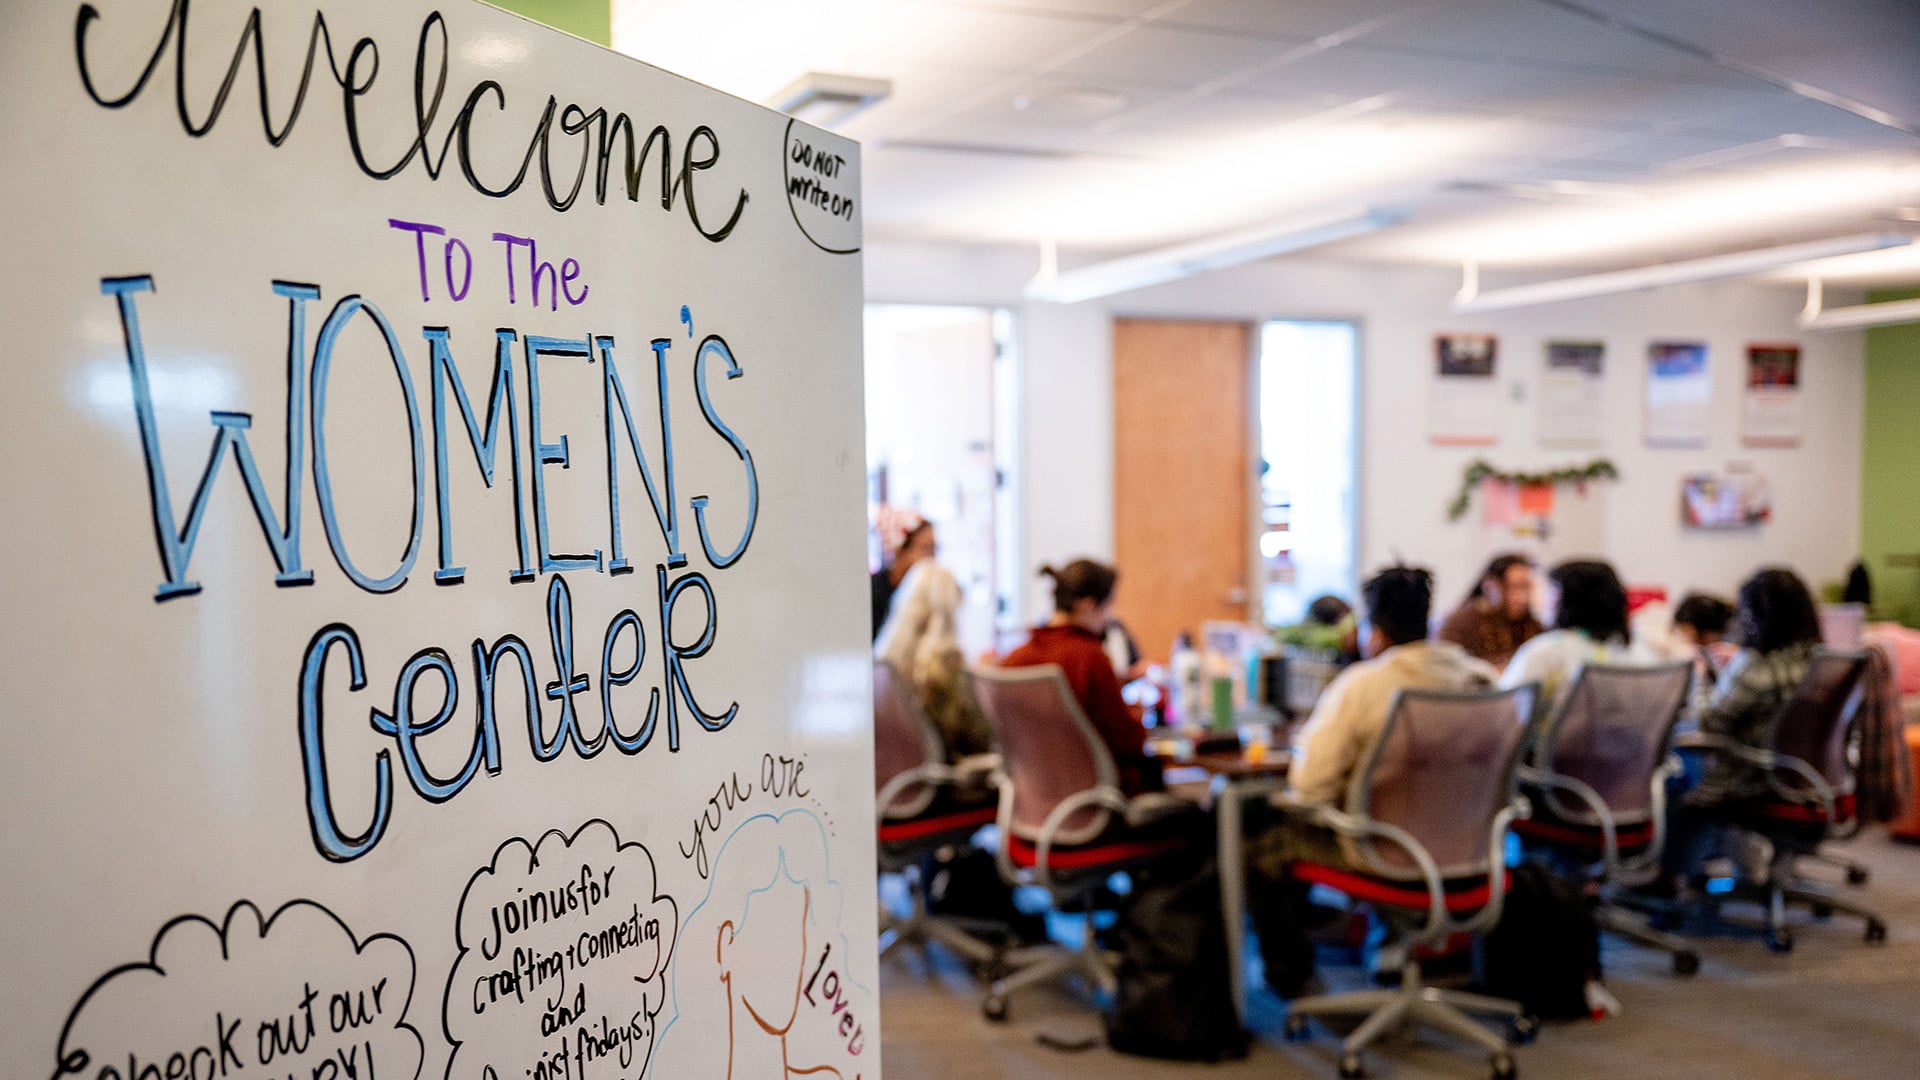 A sign reading "Welcome to the Women's Center", with a group of students sitting around a table in the background.